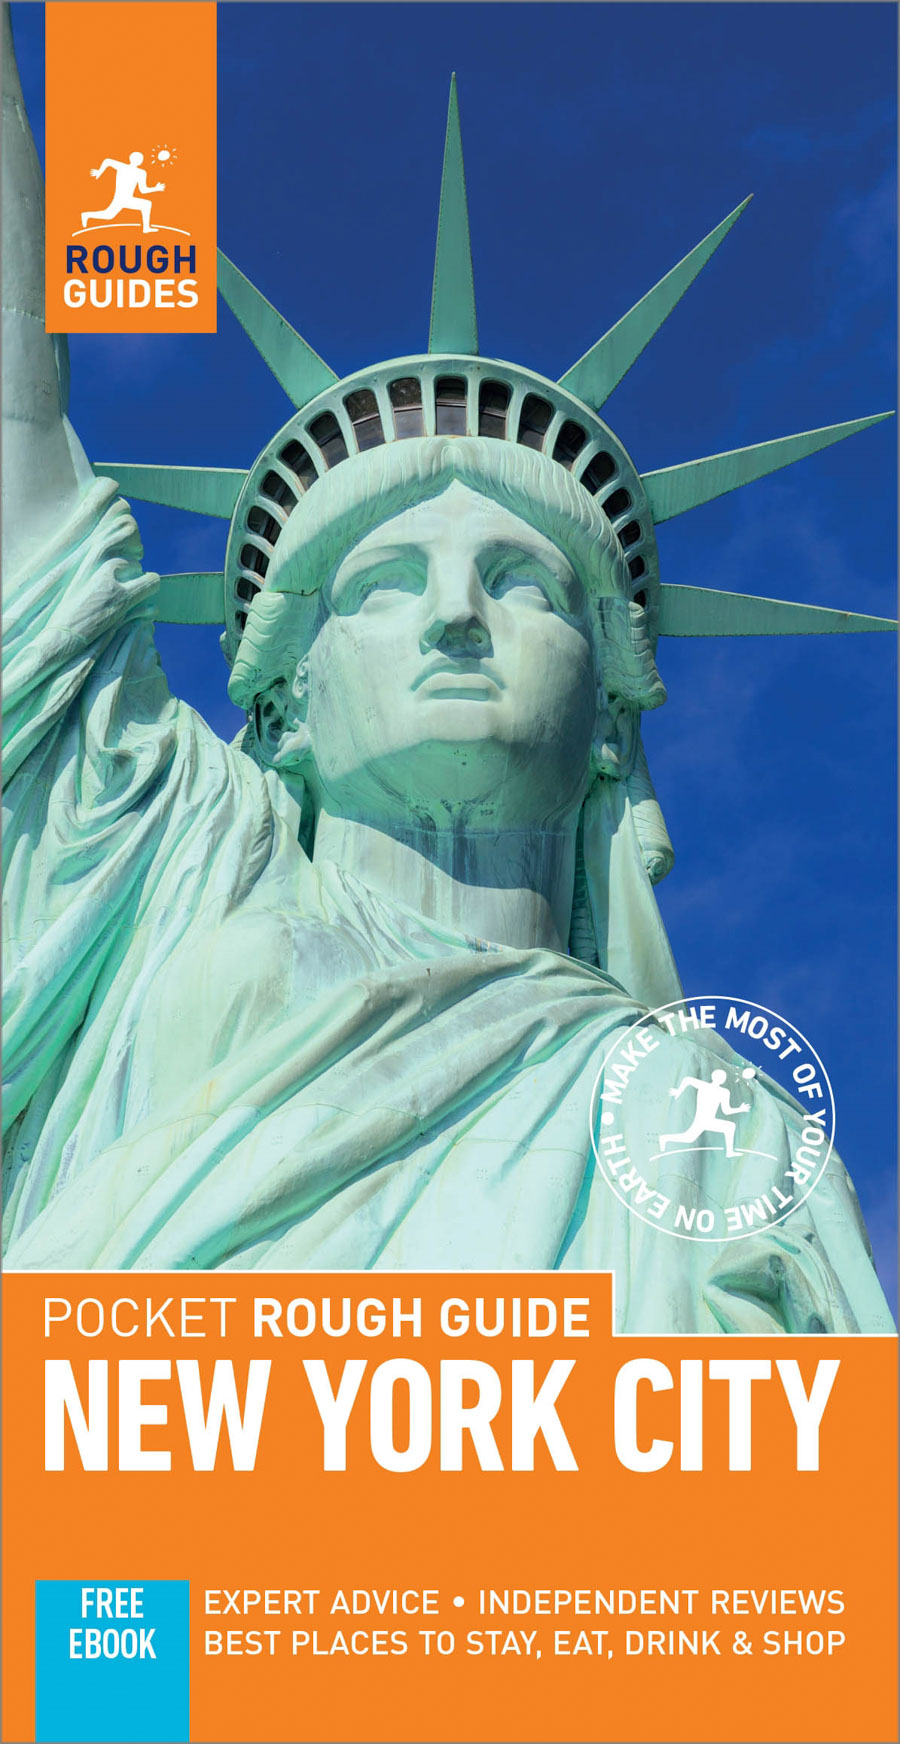 Pocket Rough Guide London Insight Guides Private trips, guidebooks